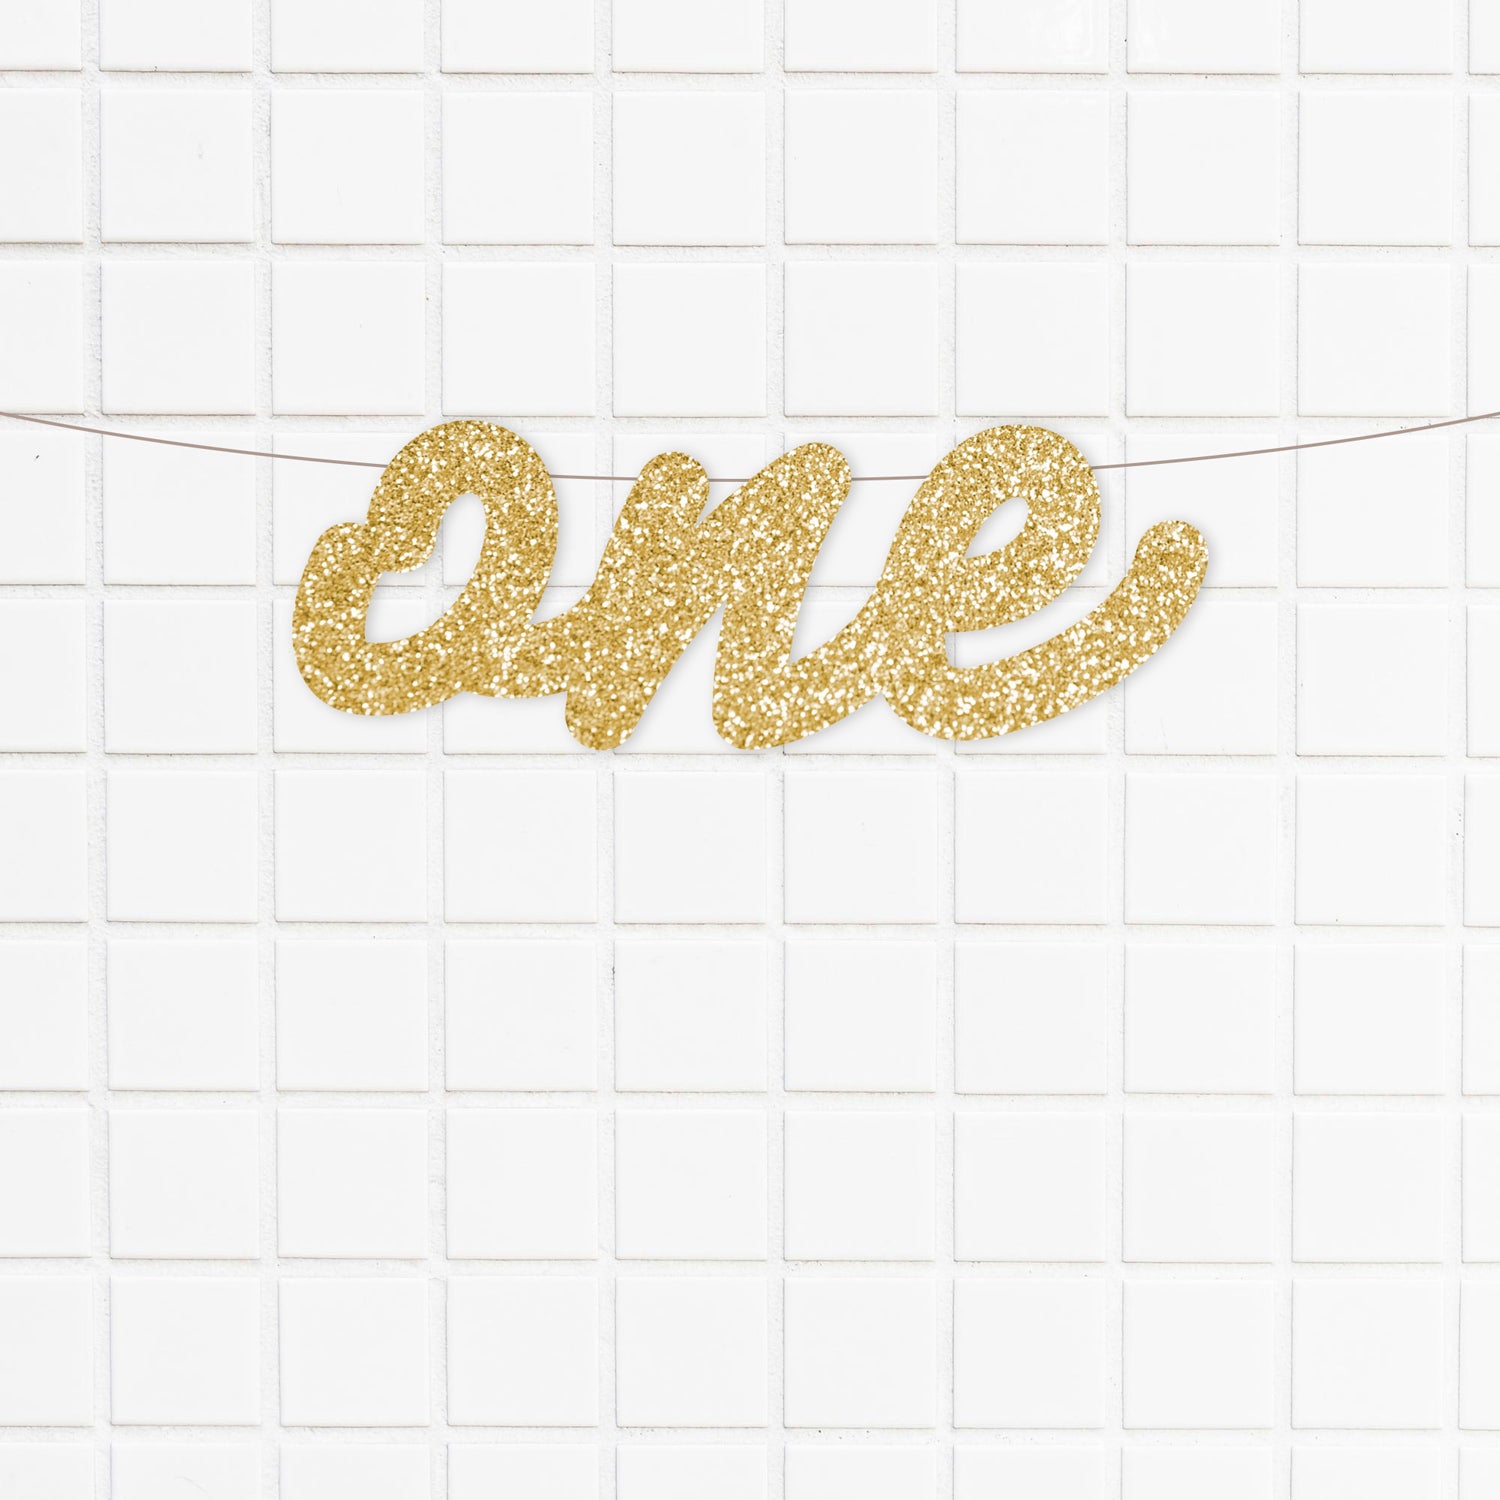 gold glitter cardstock and features a lovely script font. It is perfect for your little one's first birthday party and cake smash photos.